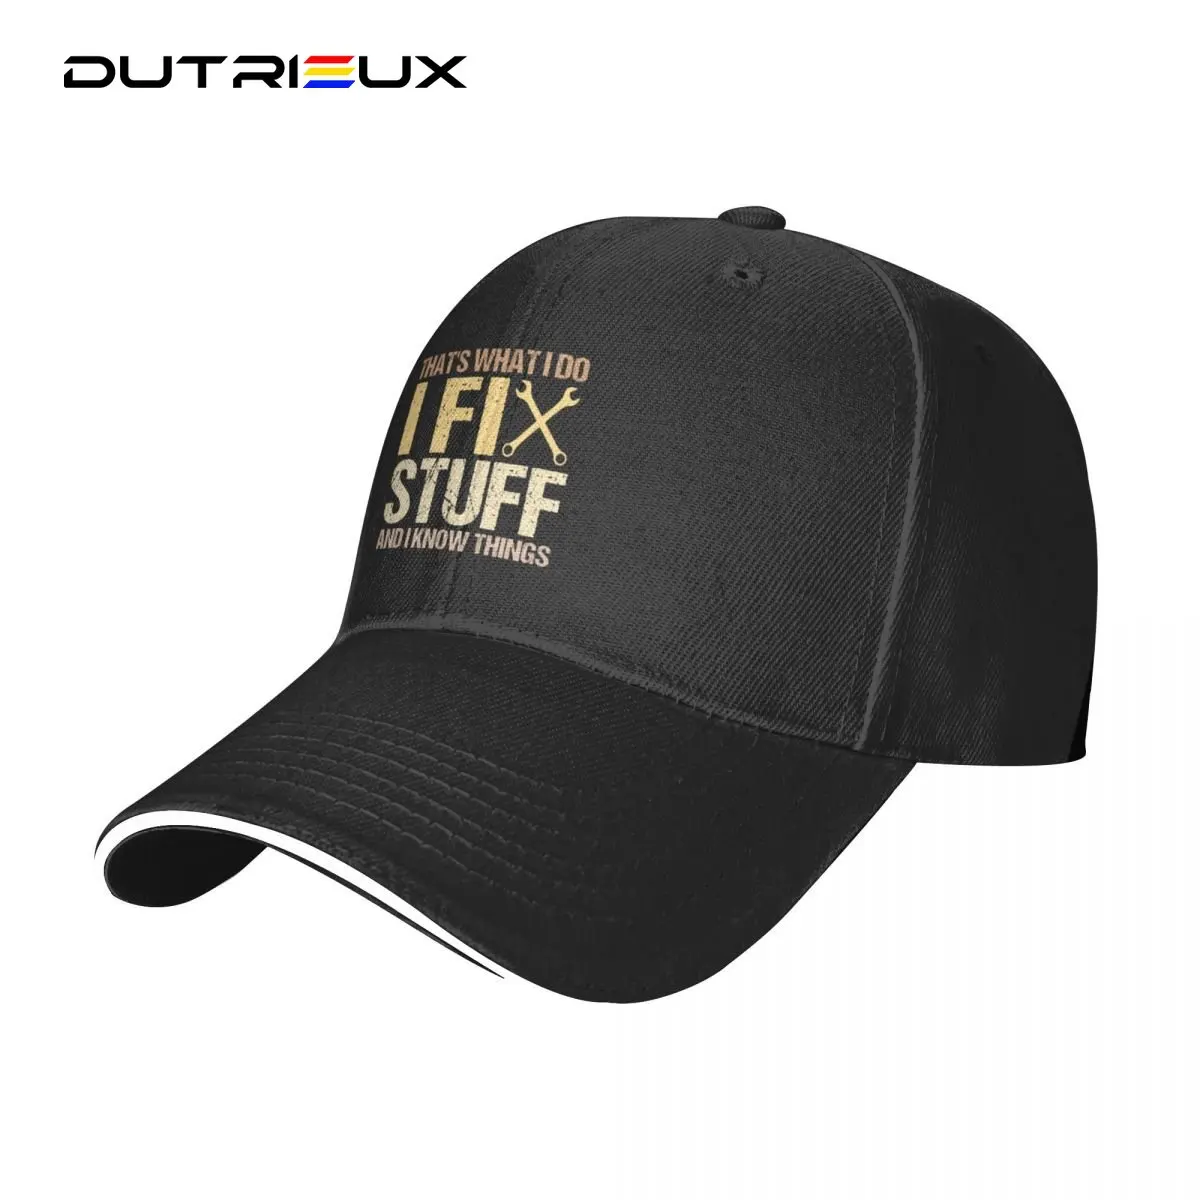 

Baseball Hat For Men Women That's What I Do I Fix Stuff And I Know Things Funny Saying For Mechanic Father Cap Sunhat Ladies Hat